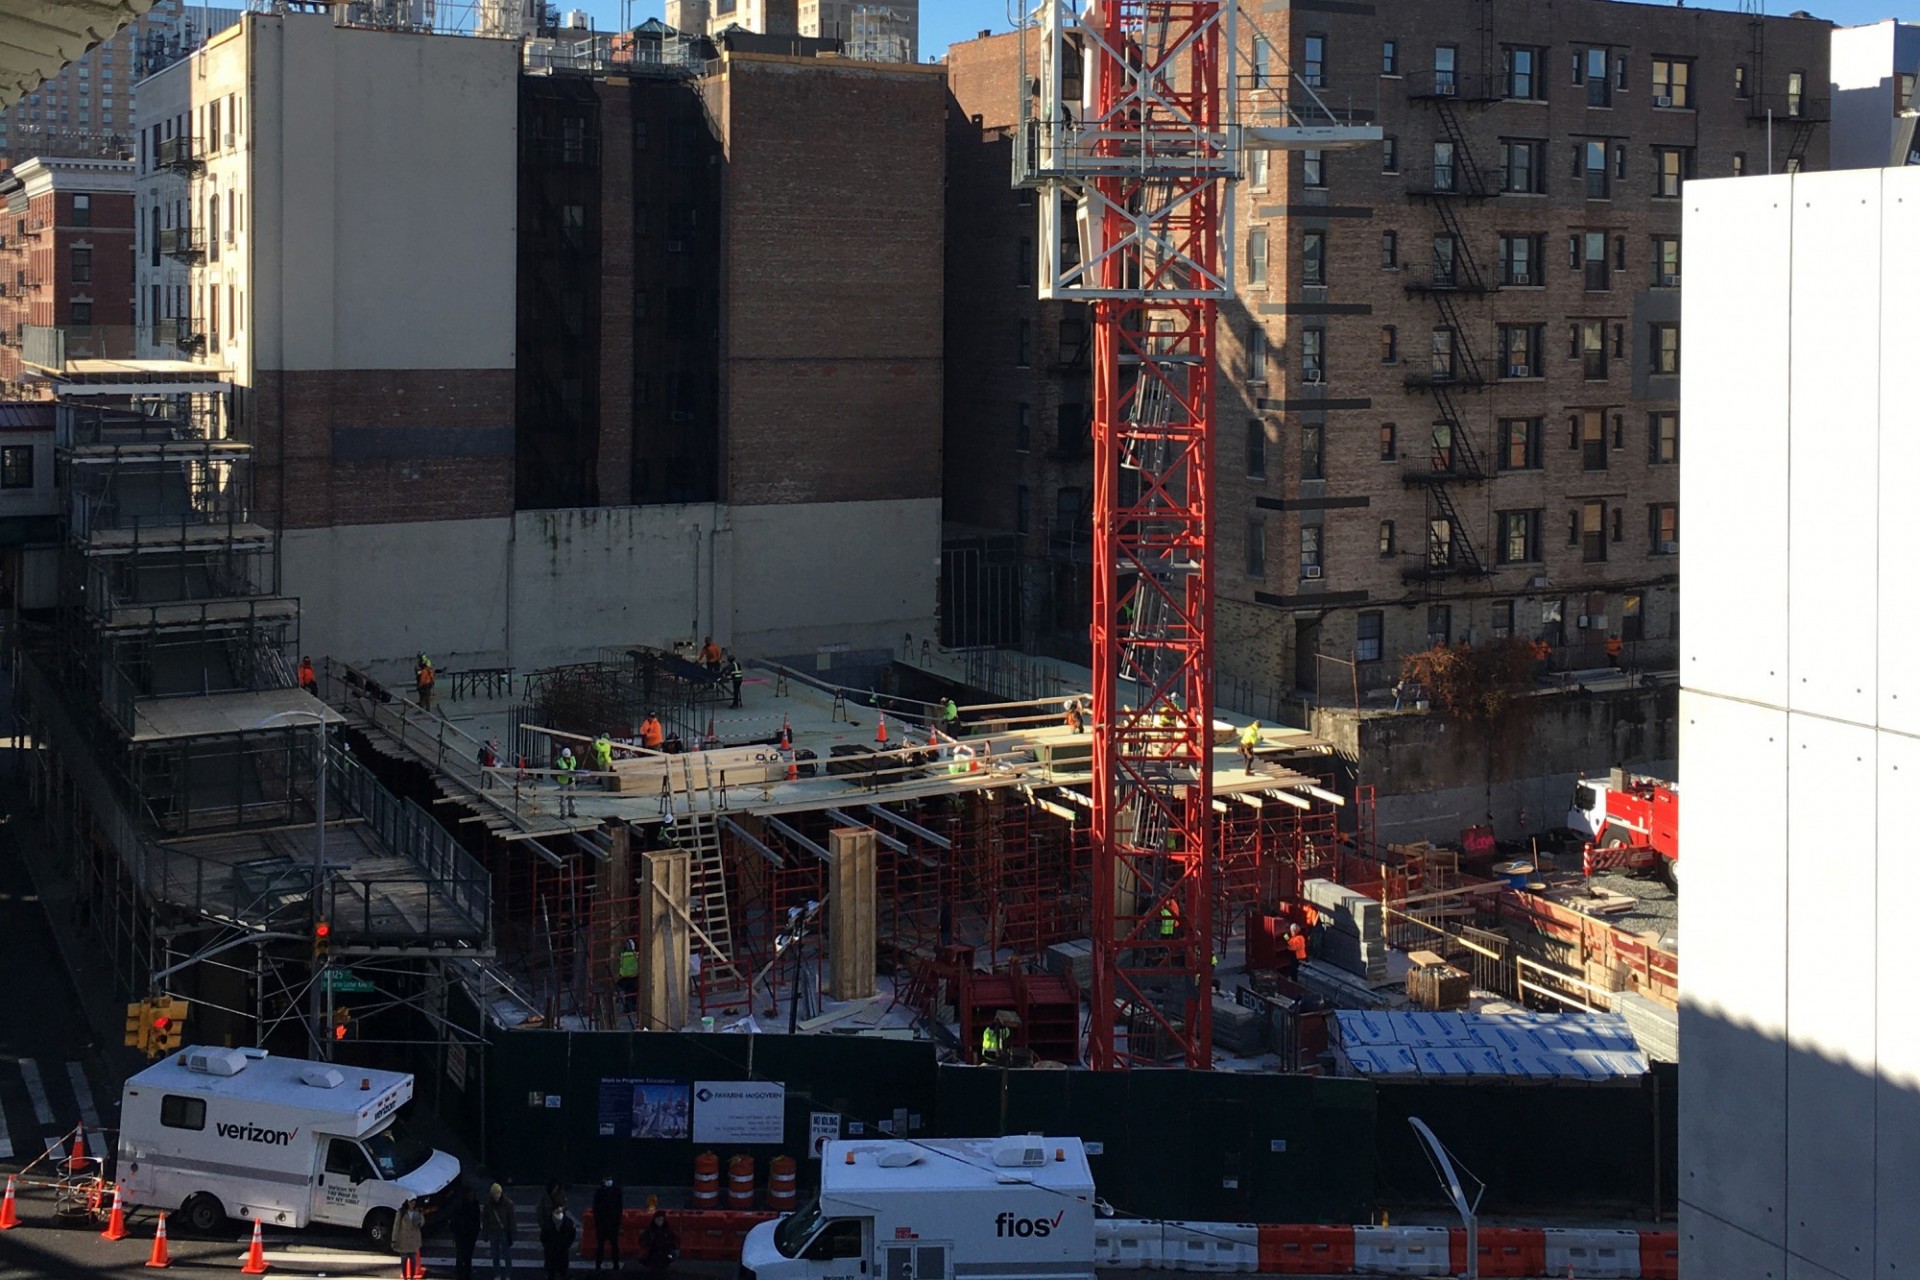 An aerial view of the 600 W. 125th Street construction site from the 125th Street subway, with a large red crane on the site.